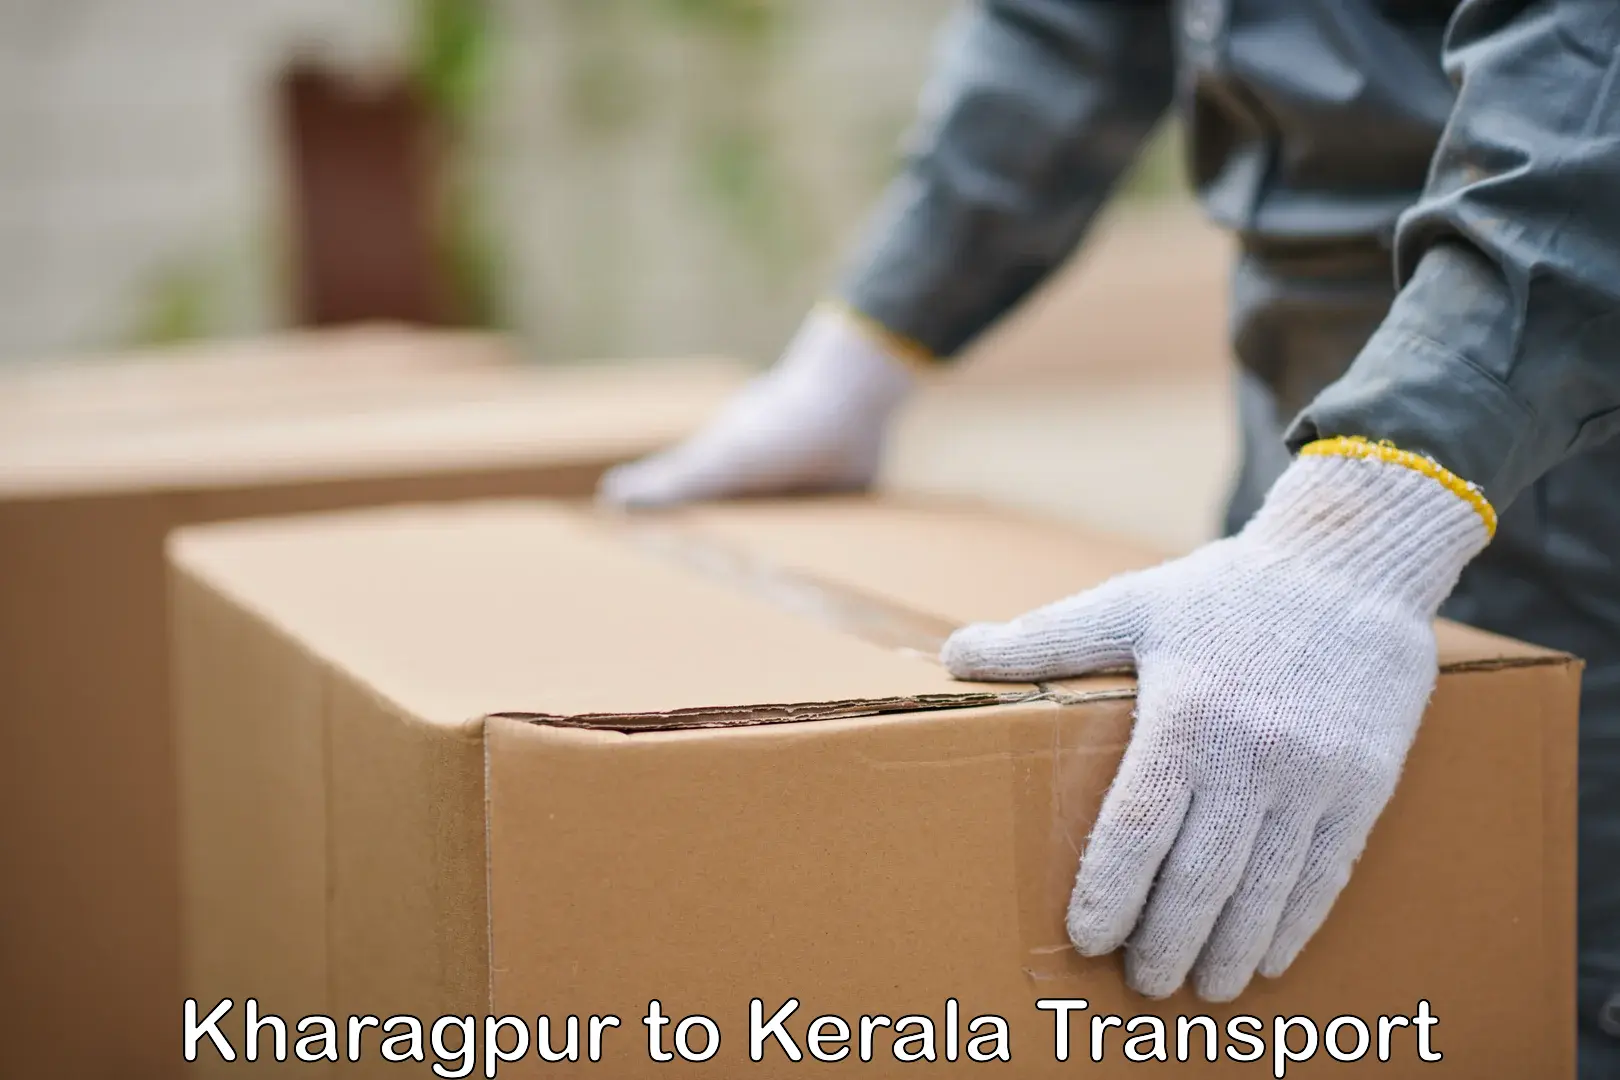 Delivery service Kharagpur to Palakkad